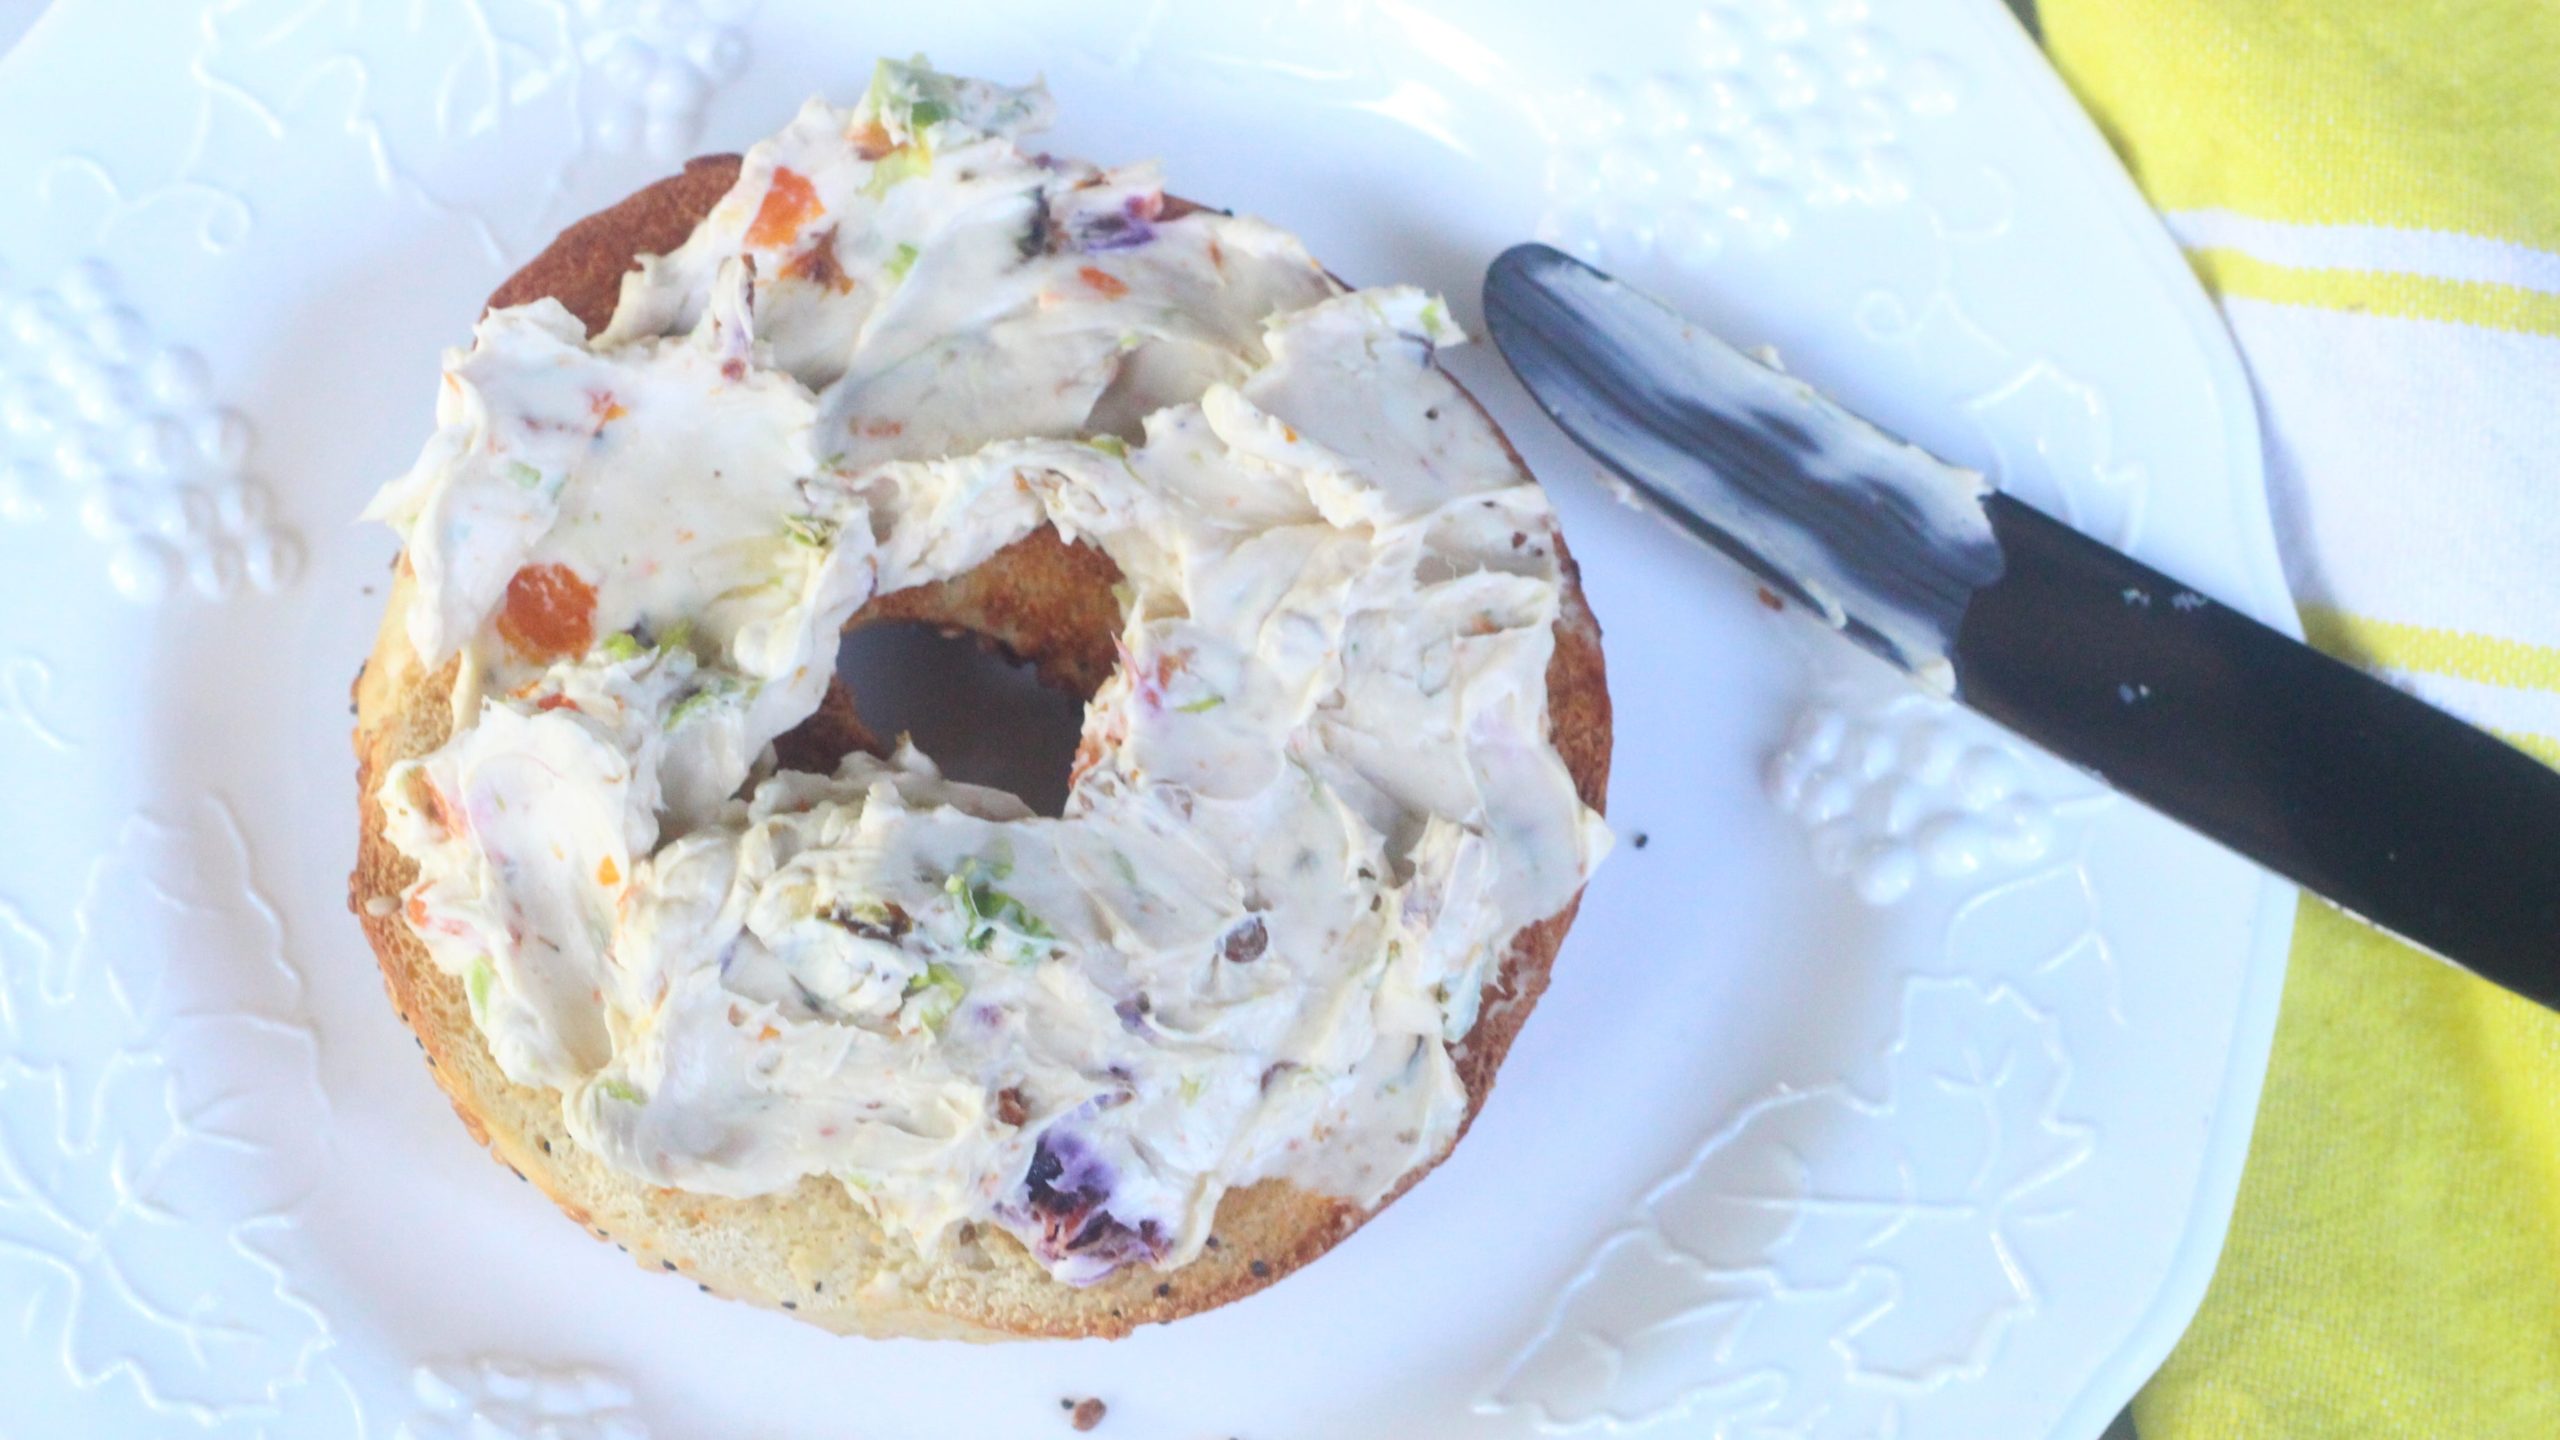 Eat More Vegetables by Mixing Them Into Cream Cheese, Because Why Not?